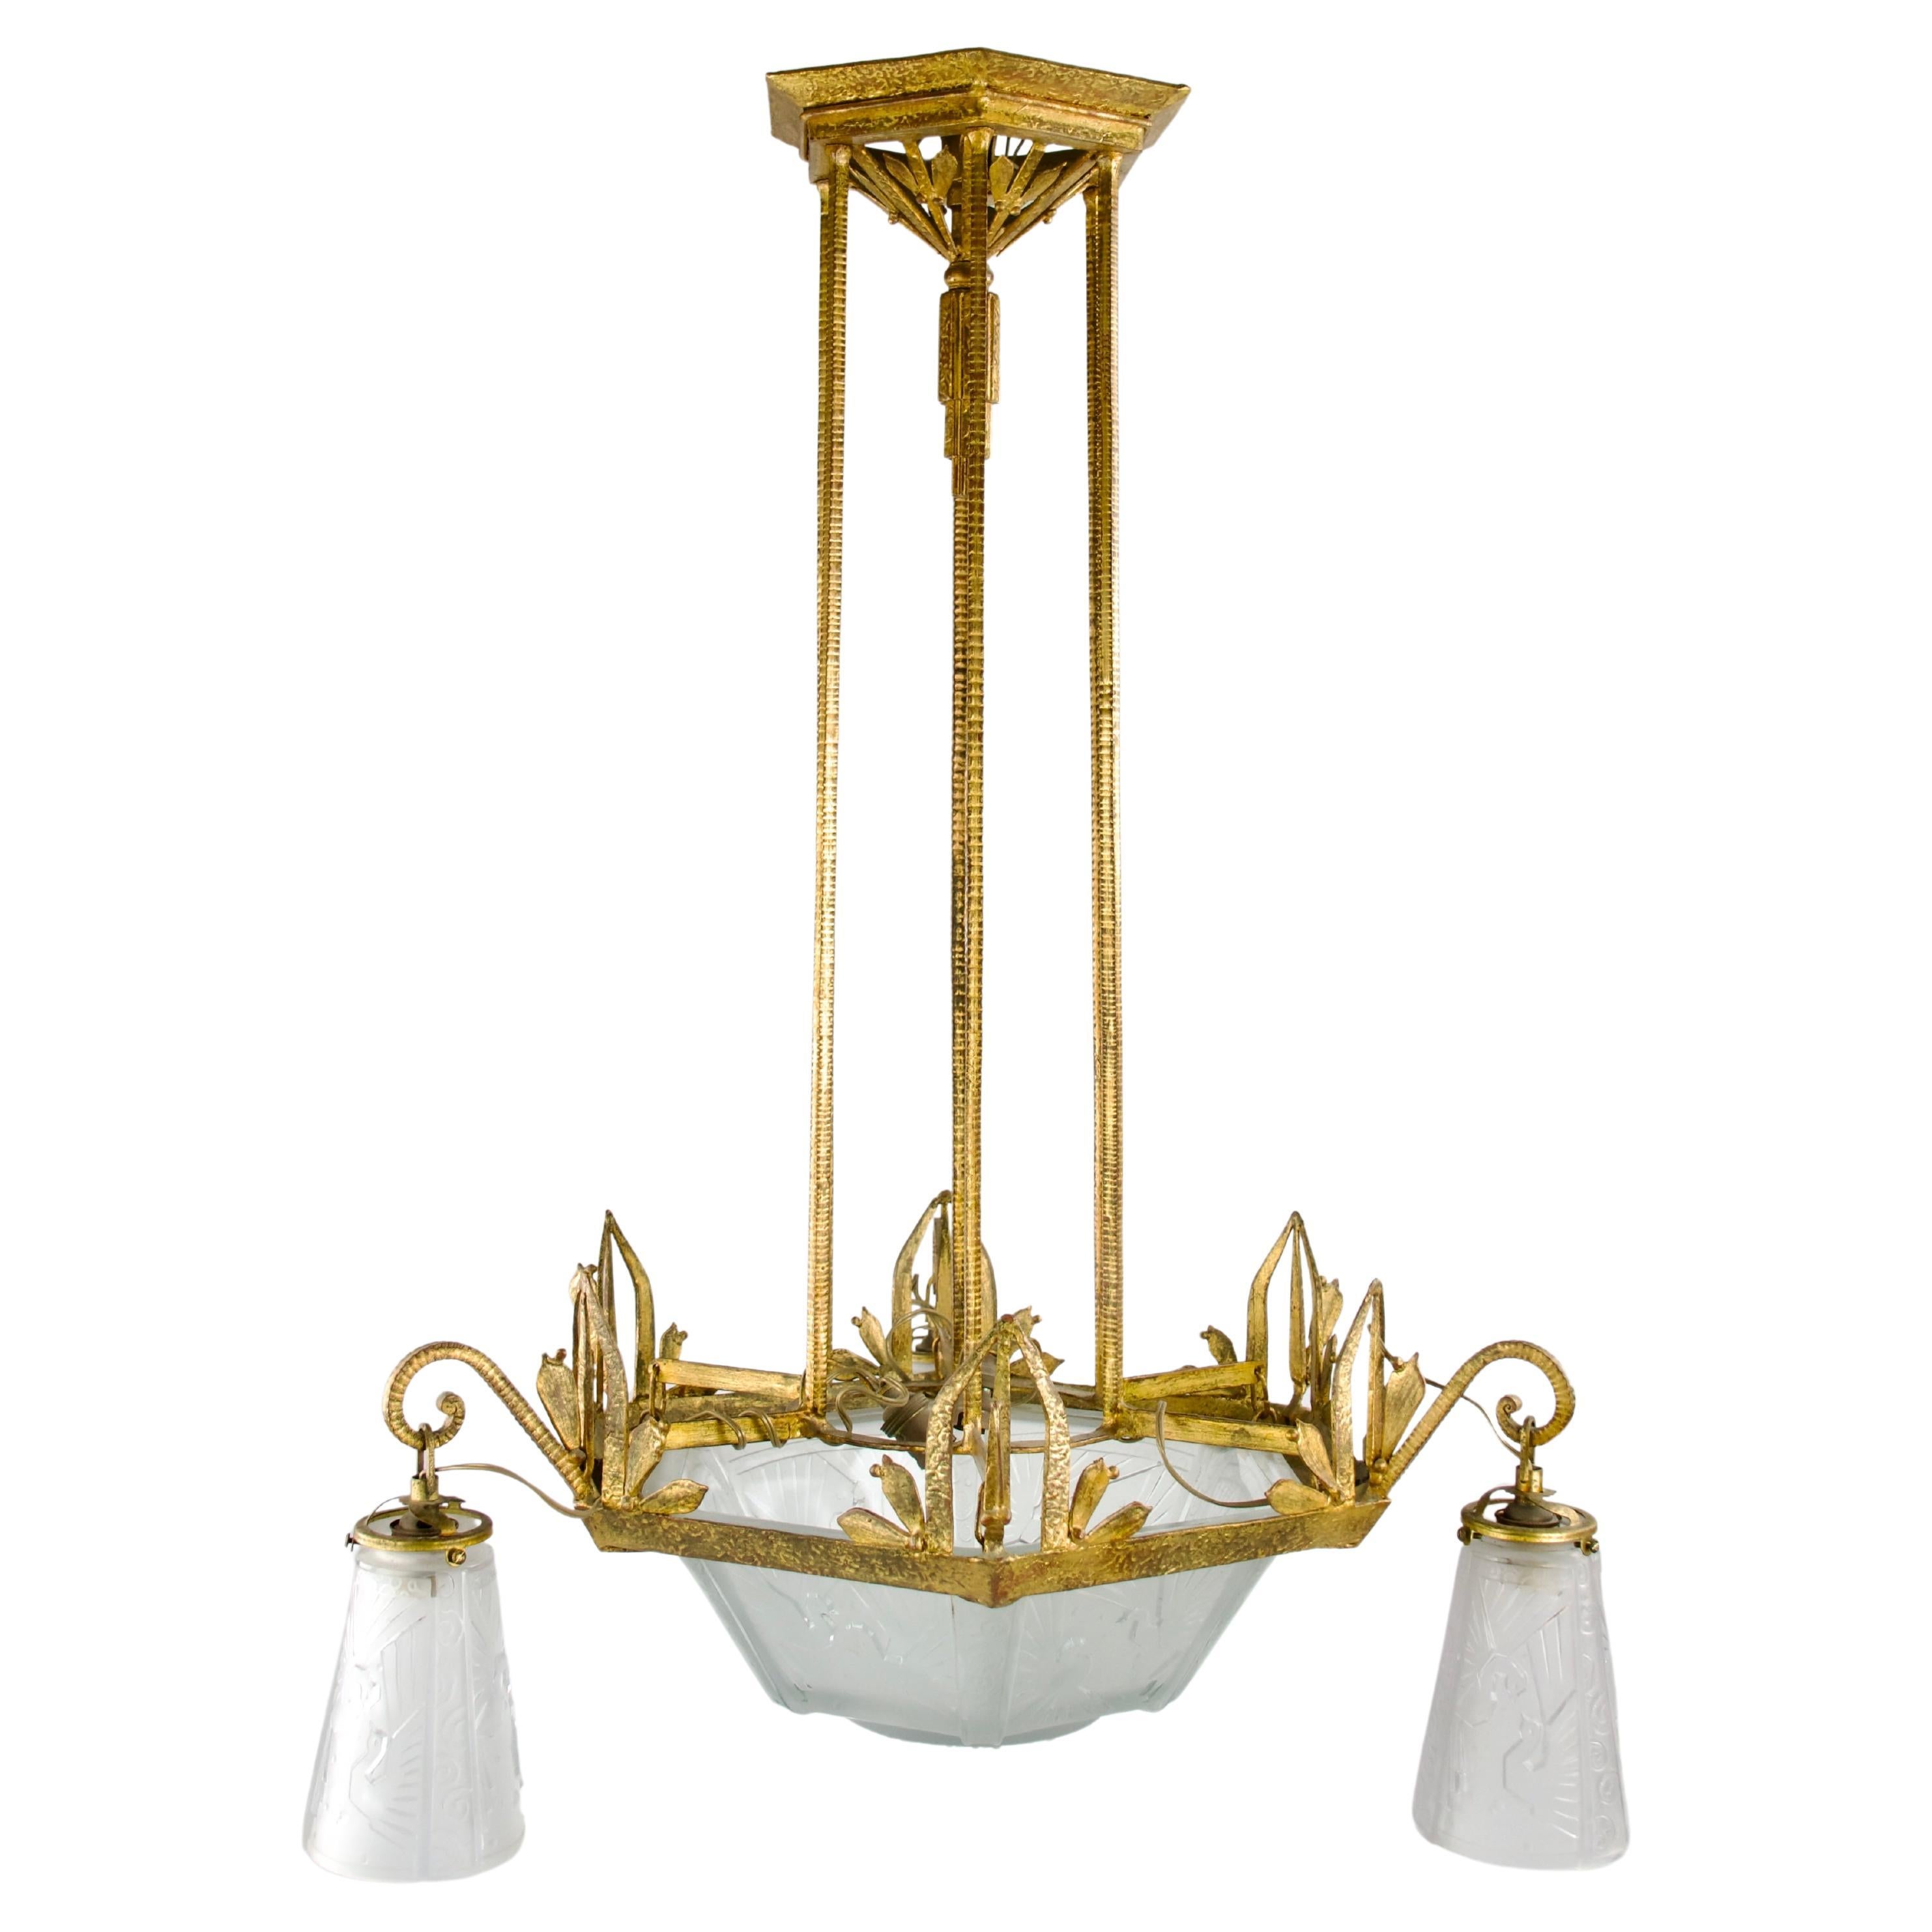 Muller Frères Chandelier, Gilt Frame and Peacock Motifs, French Art Deco